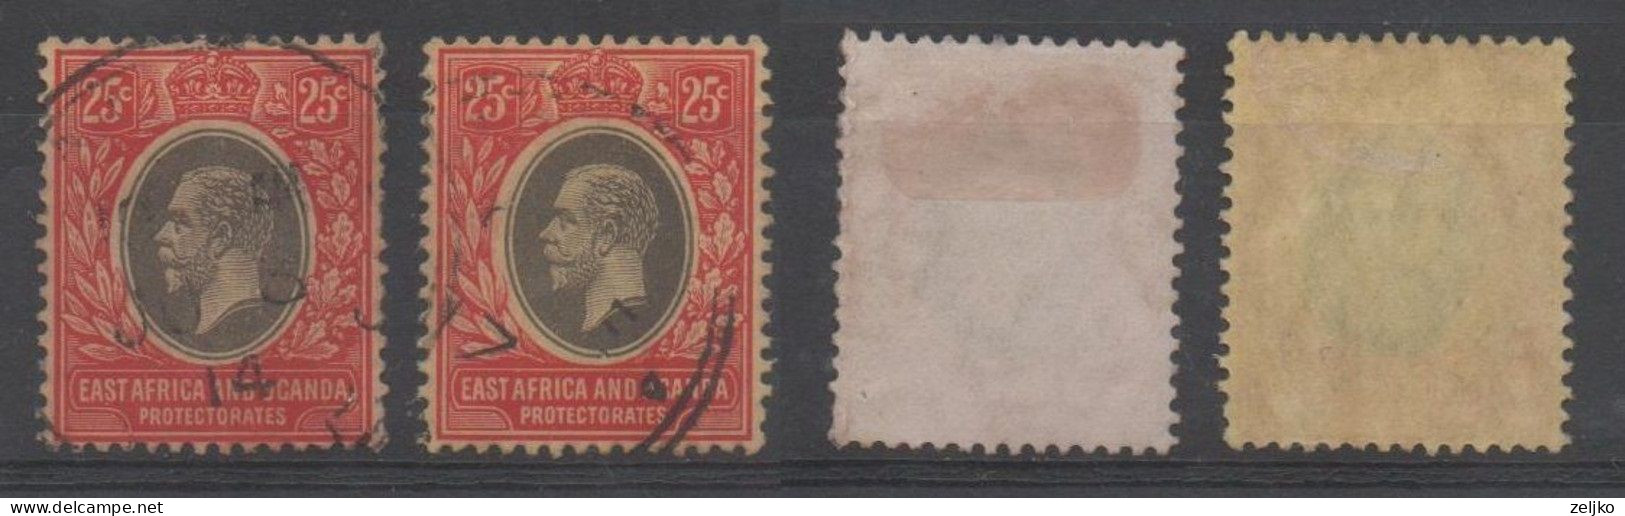 East Africa And Uganda Protectorates, Used, Michel 48, White And Yellow Back Side - East Africa & Uganda Protectorates